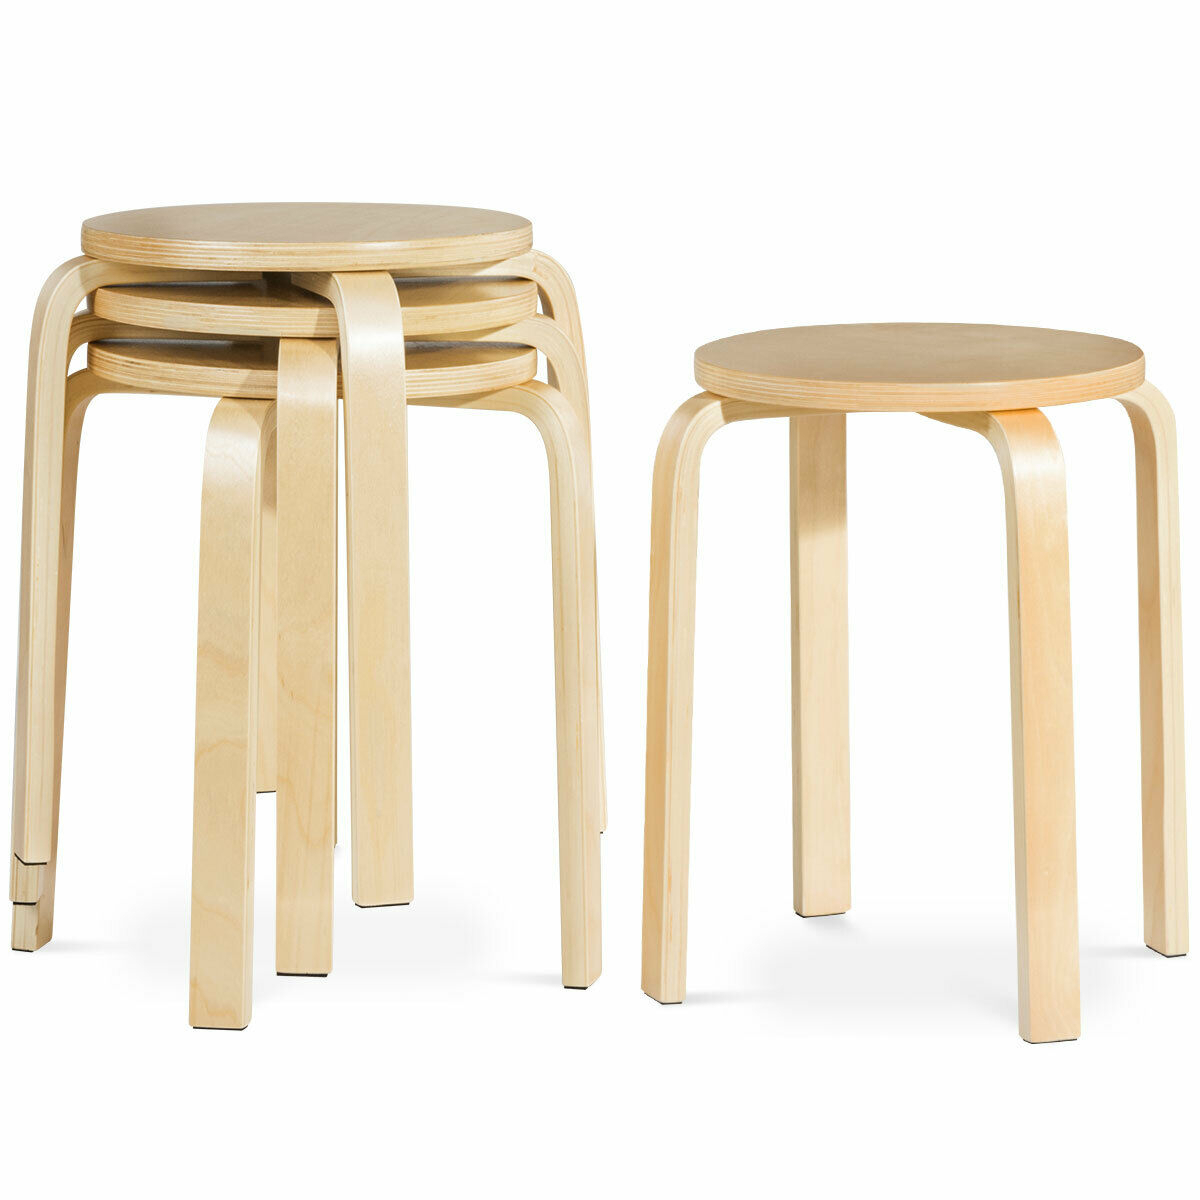 Set Of 4 18'' Stacking Stool Round Dining Chair Backless Wood Home Decor